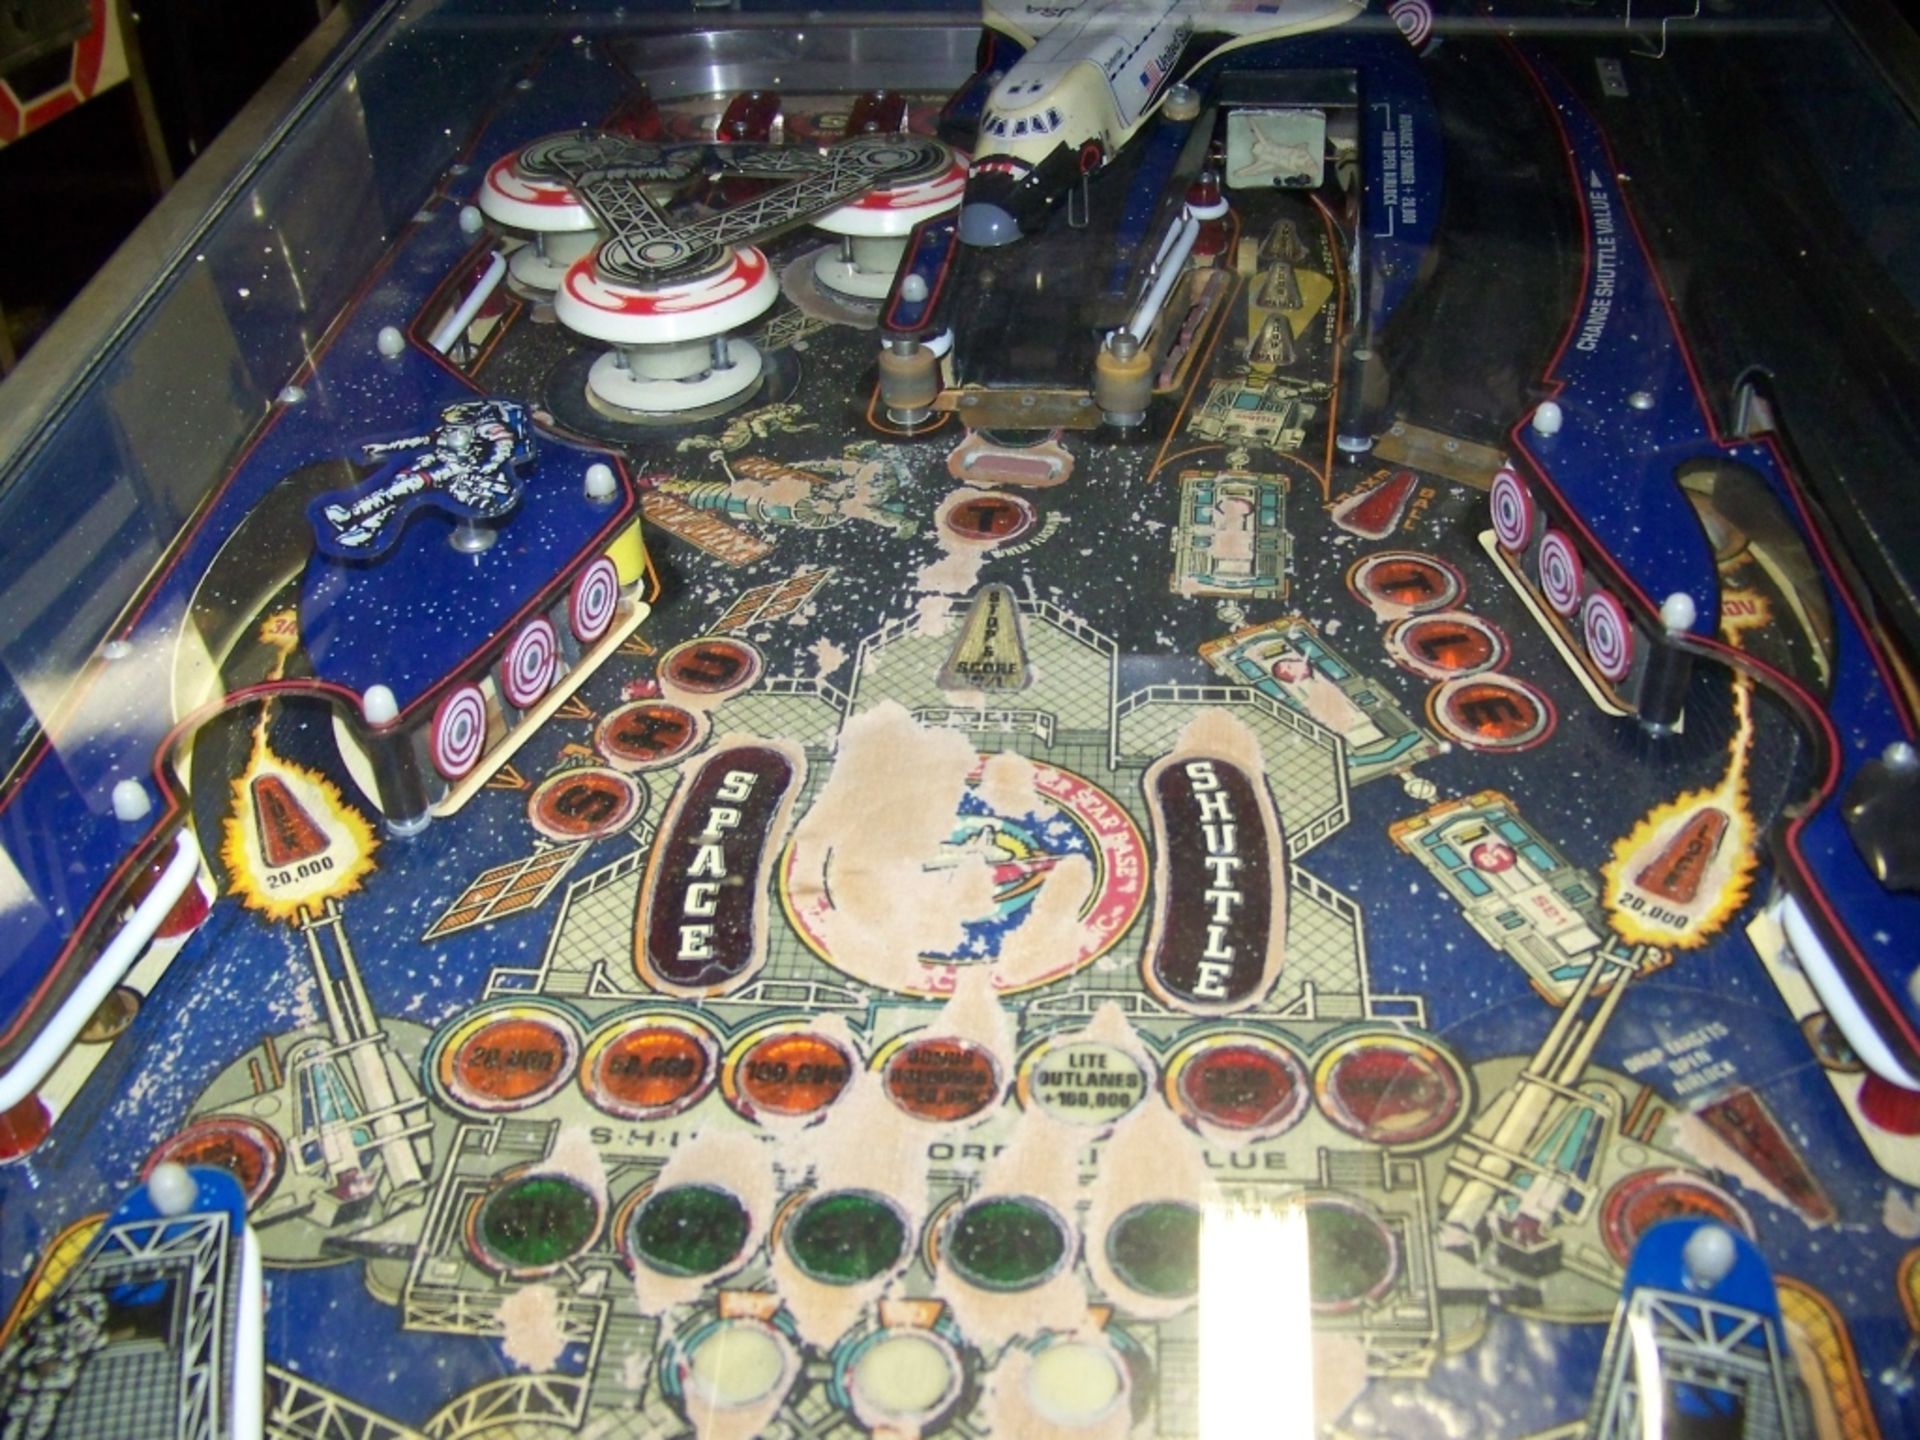 SPACE SHUTTLE PINBALL MACHINE PROJECT WILLIAMS Item is in used condition. Evidence of wear and - Image 2 of 6